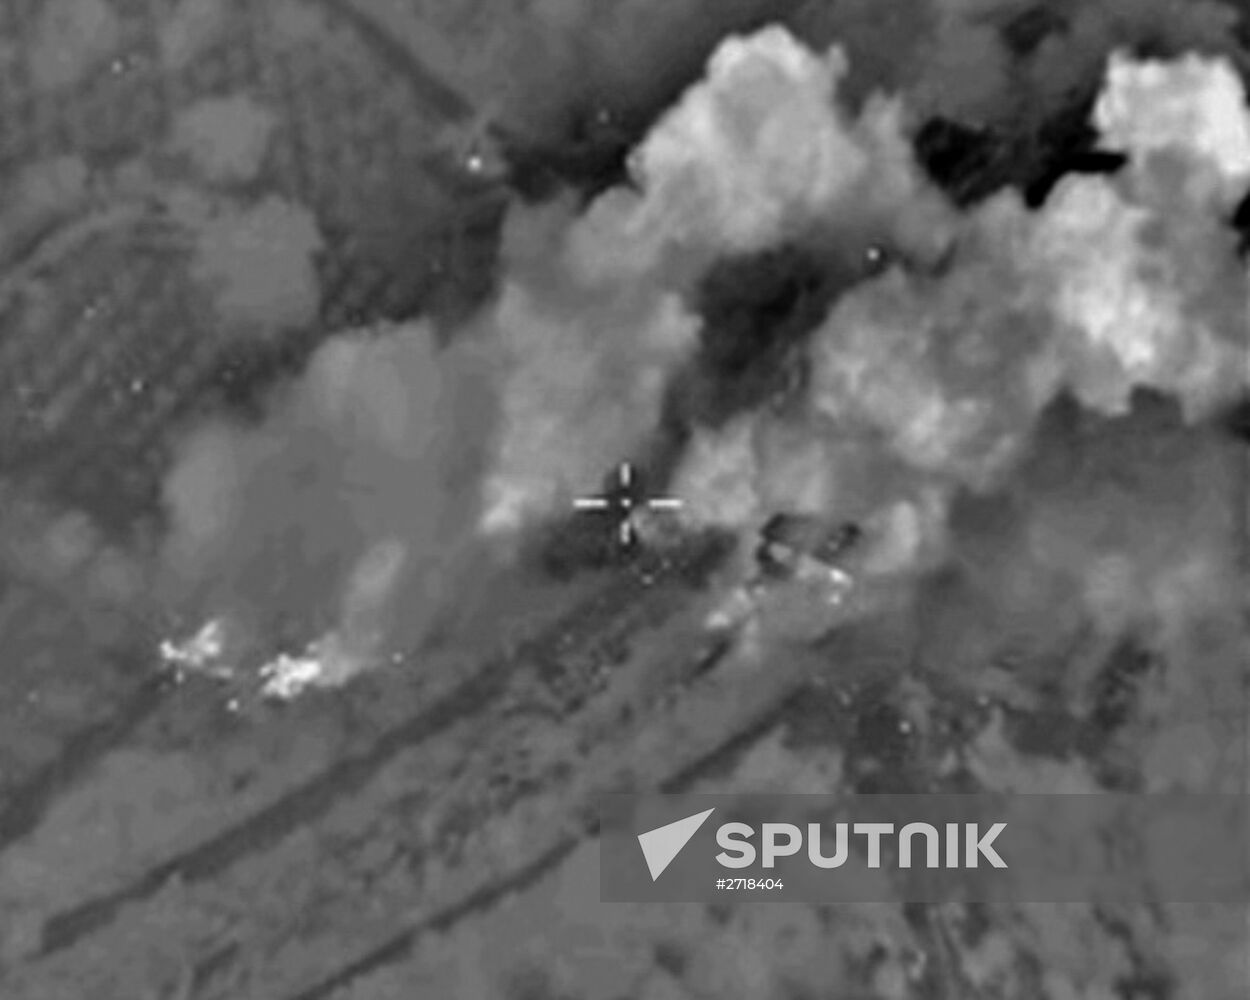 Russian Air Force destroyed ISIS weapons depots